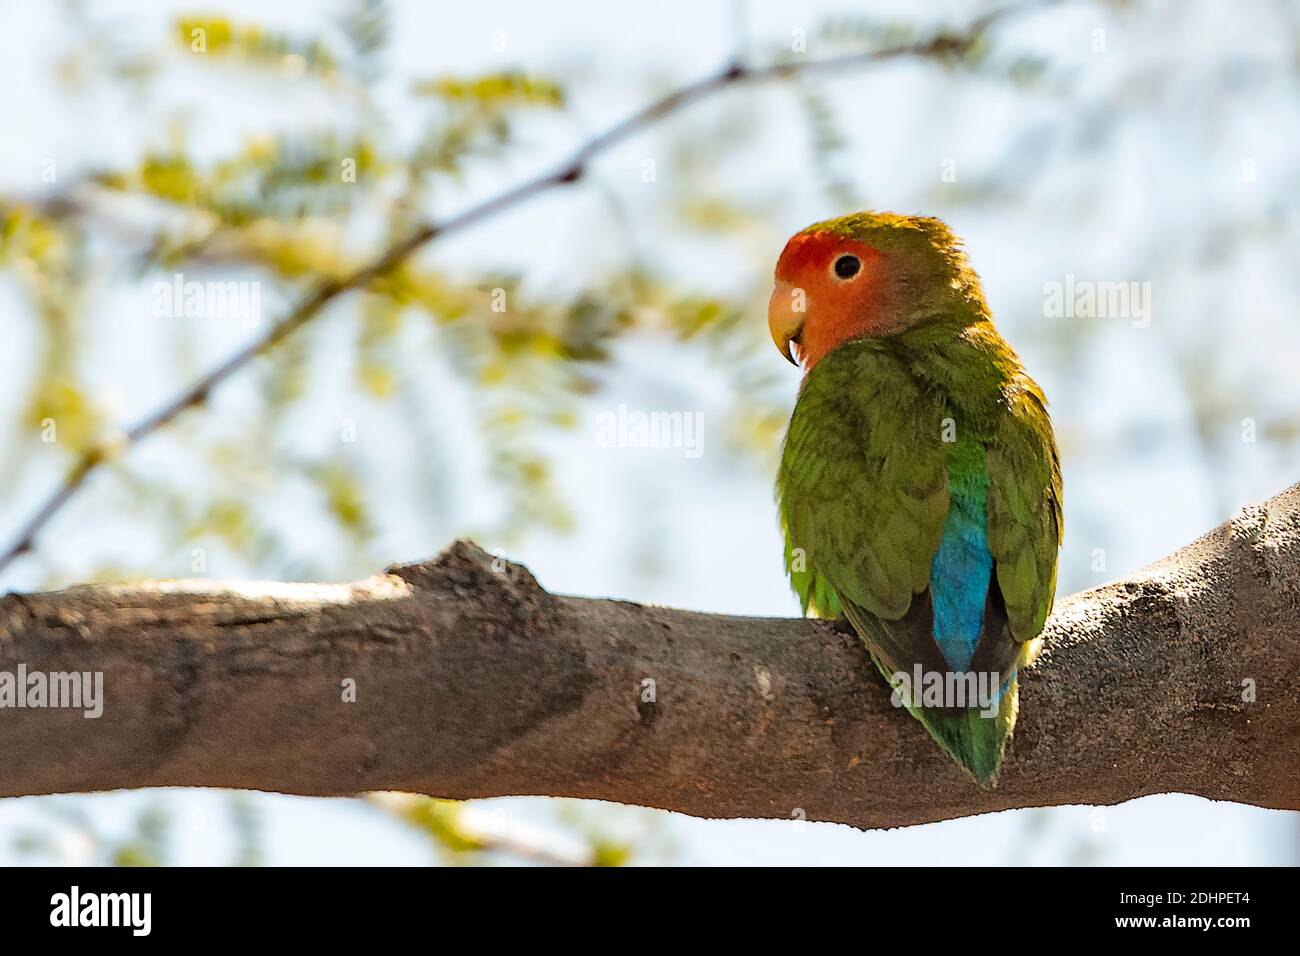 Rosy-faced love bird (Agapornis roseicollis). Photo from Phoenix, Arizona (USA) where a population originating from escaped captivated birds has been Stock Photo